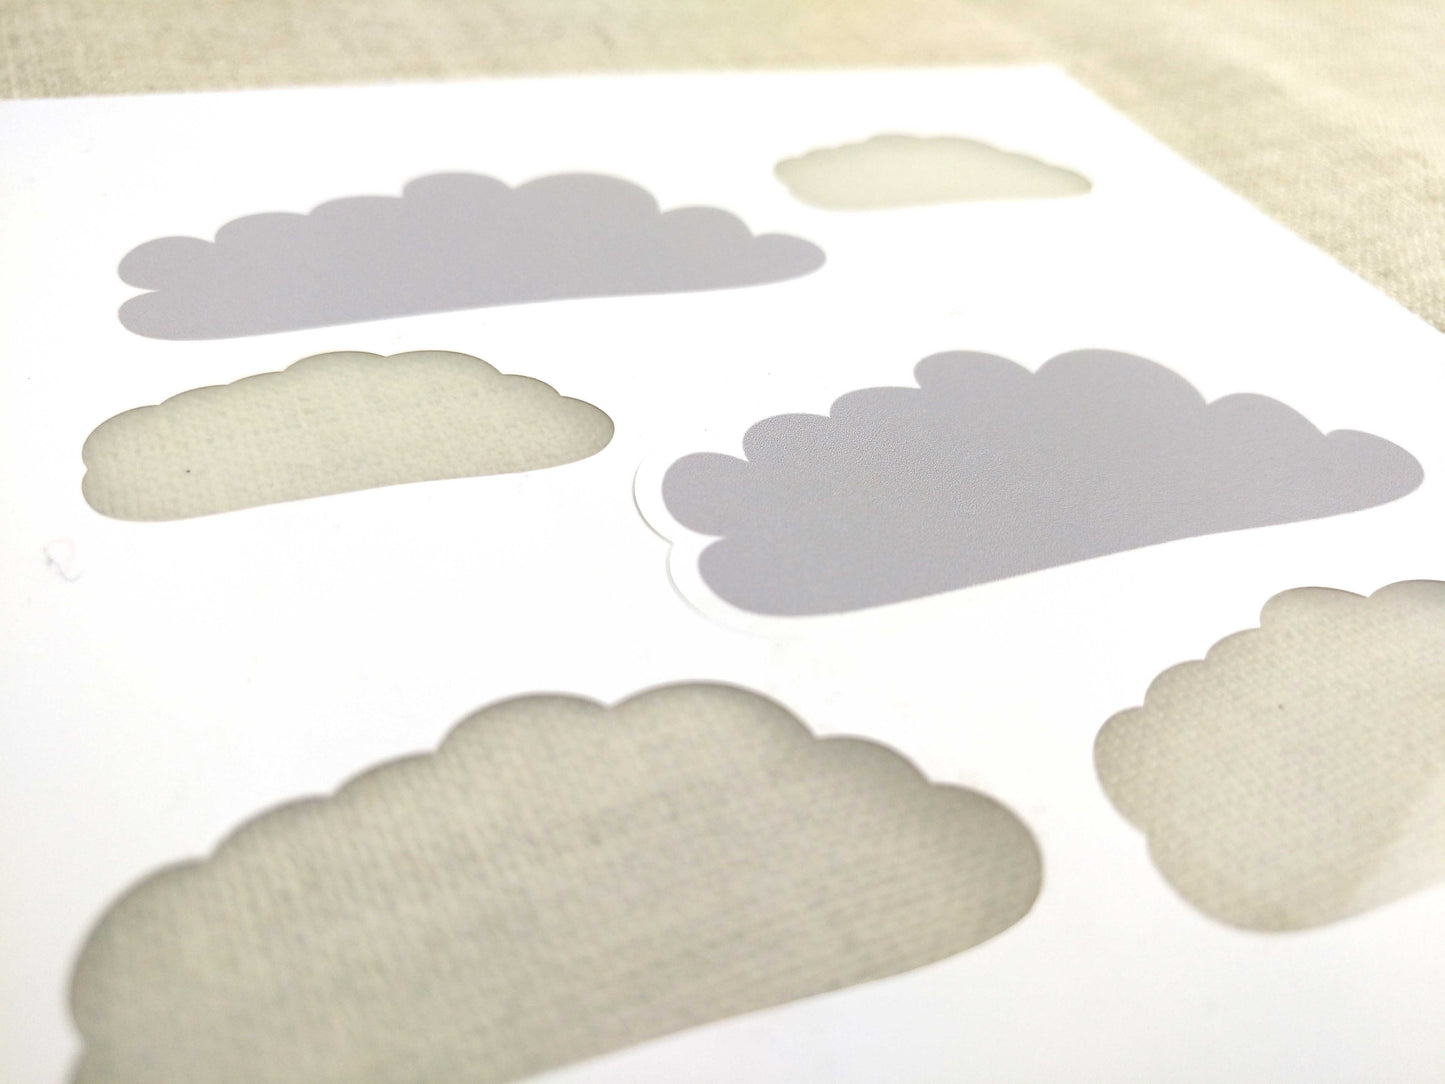 Cloudy Day Iron on Decals